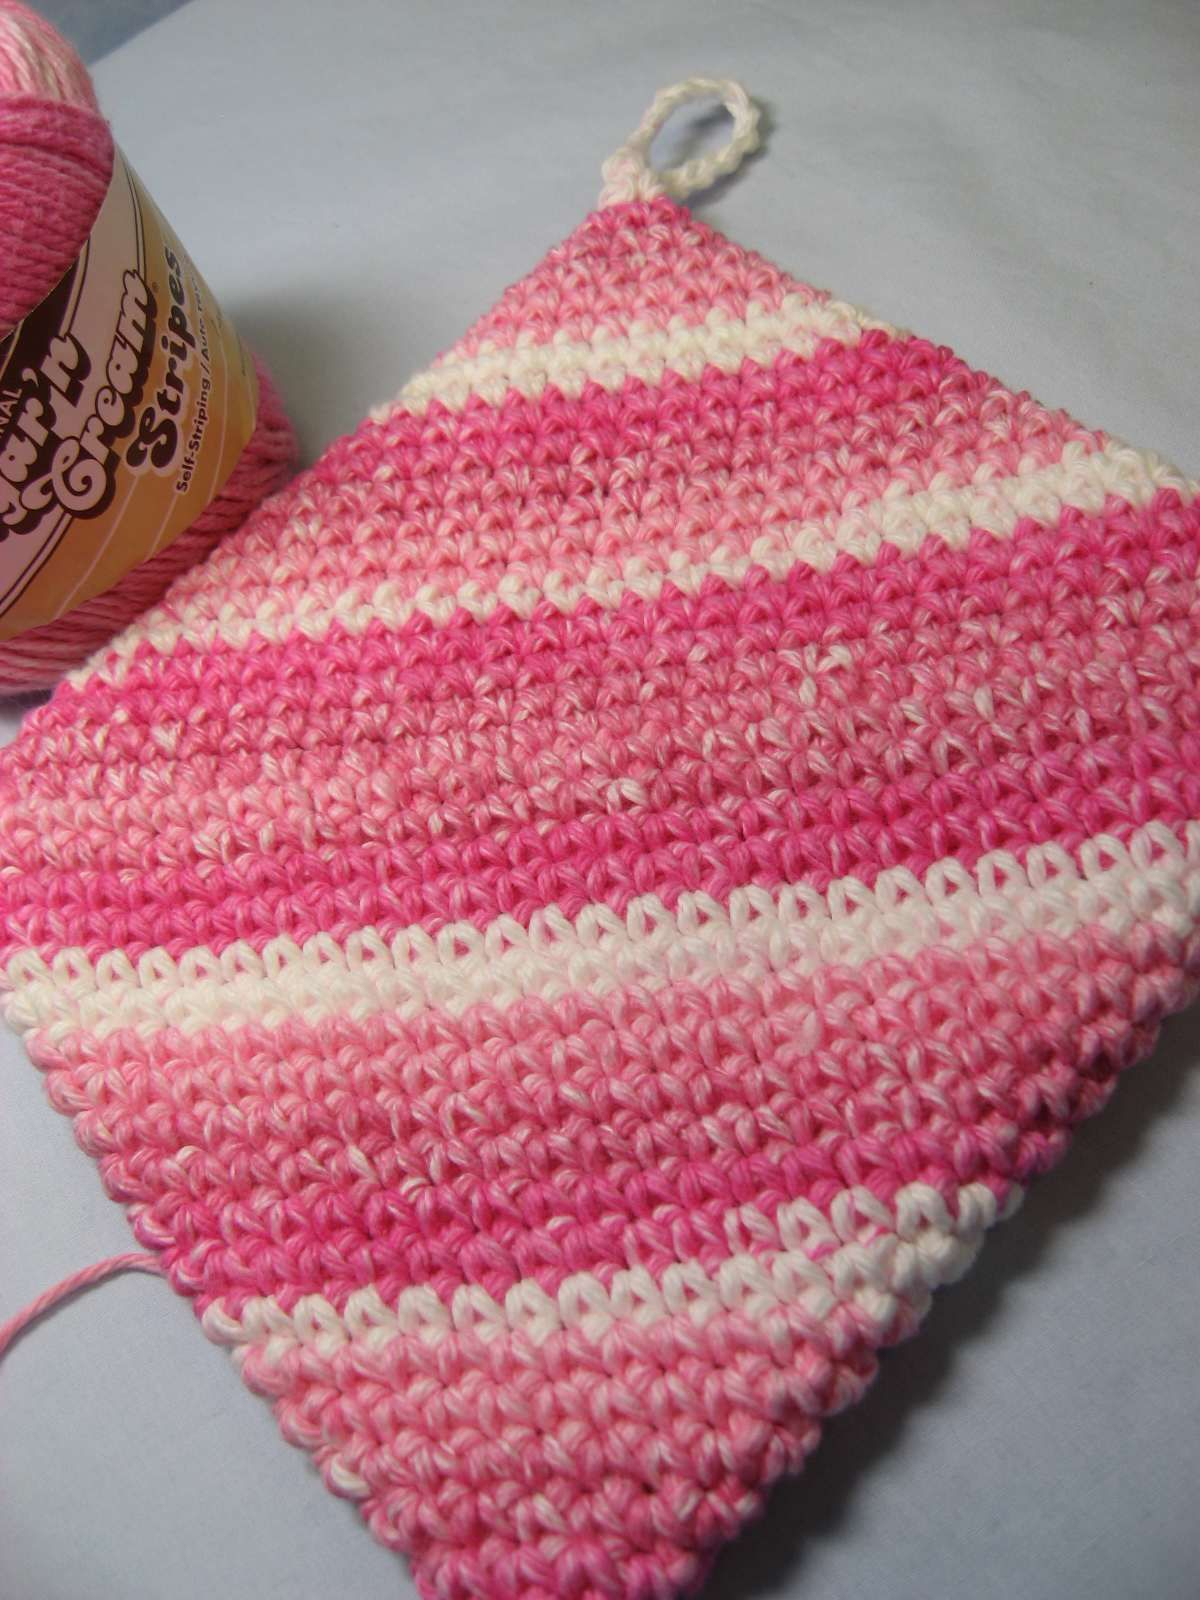 Double Thick Diagonal Crochet Potholder Pattern Hooked On Needles Crocheted Hot Padpotholder Its Double Thick